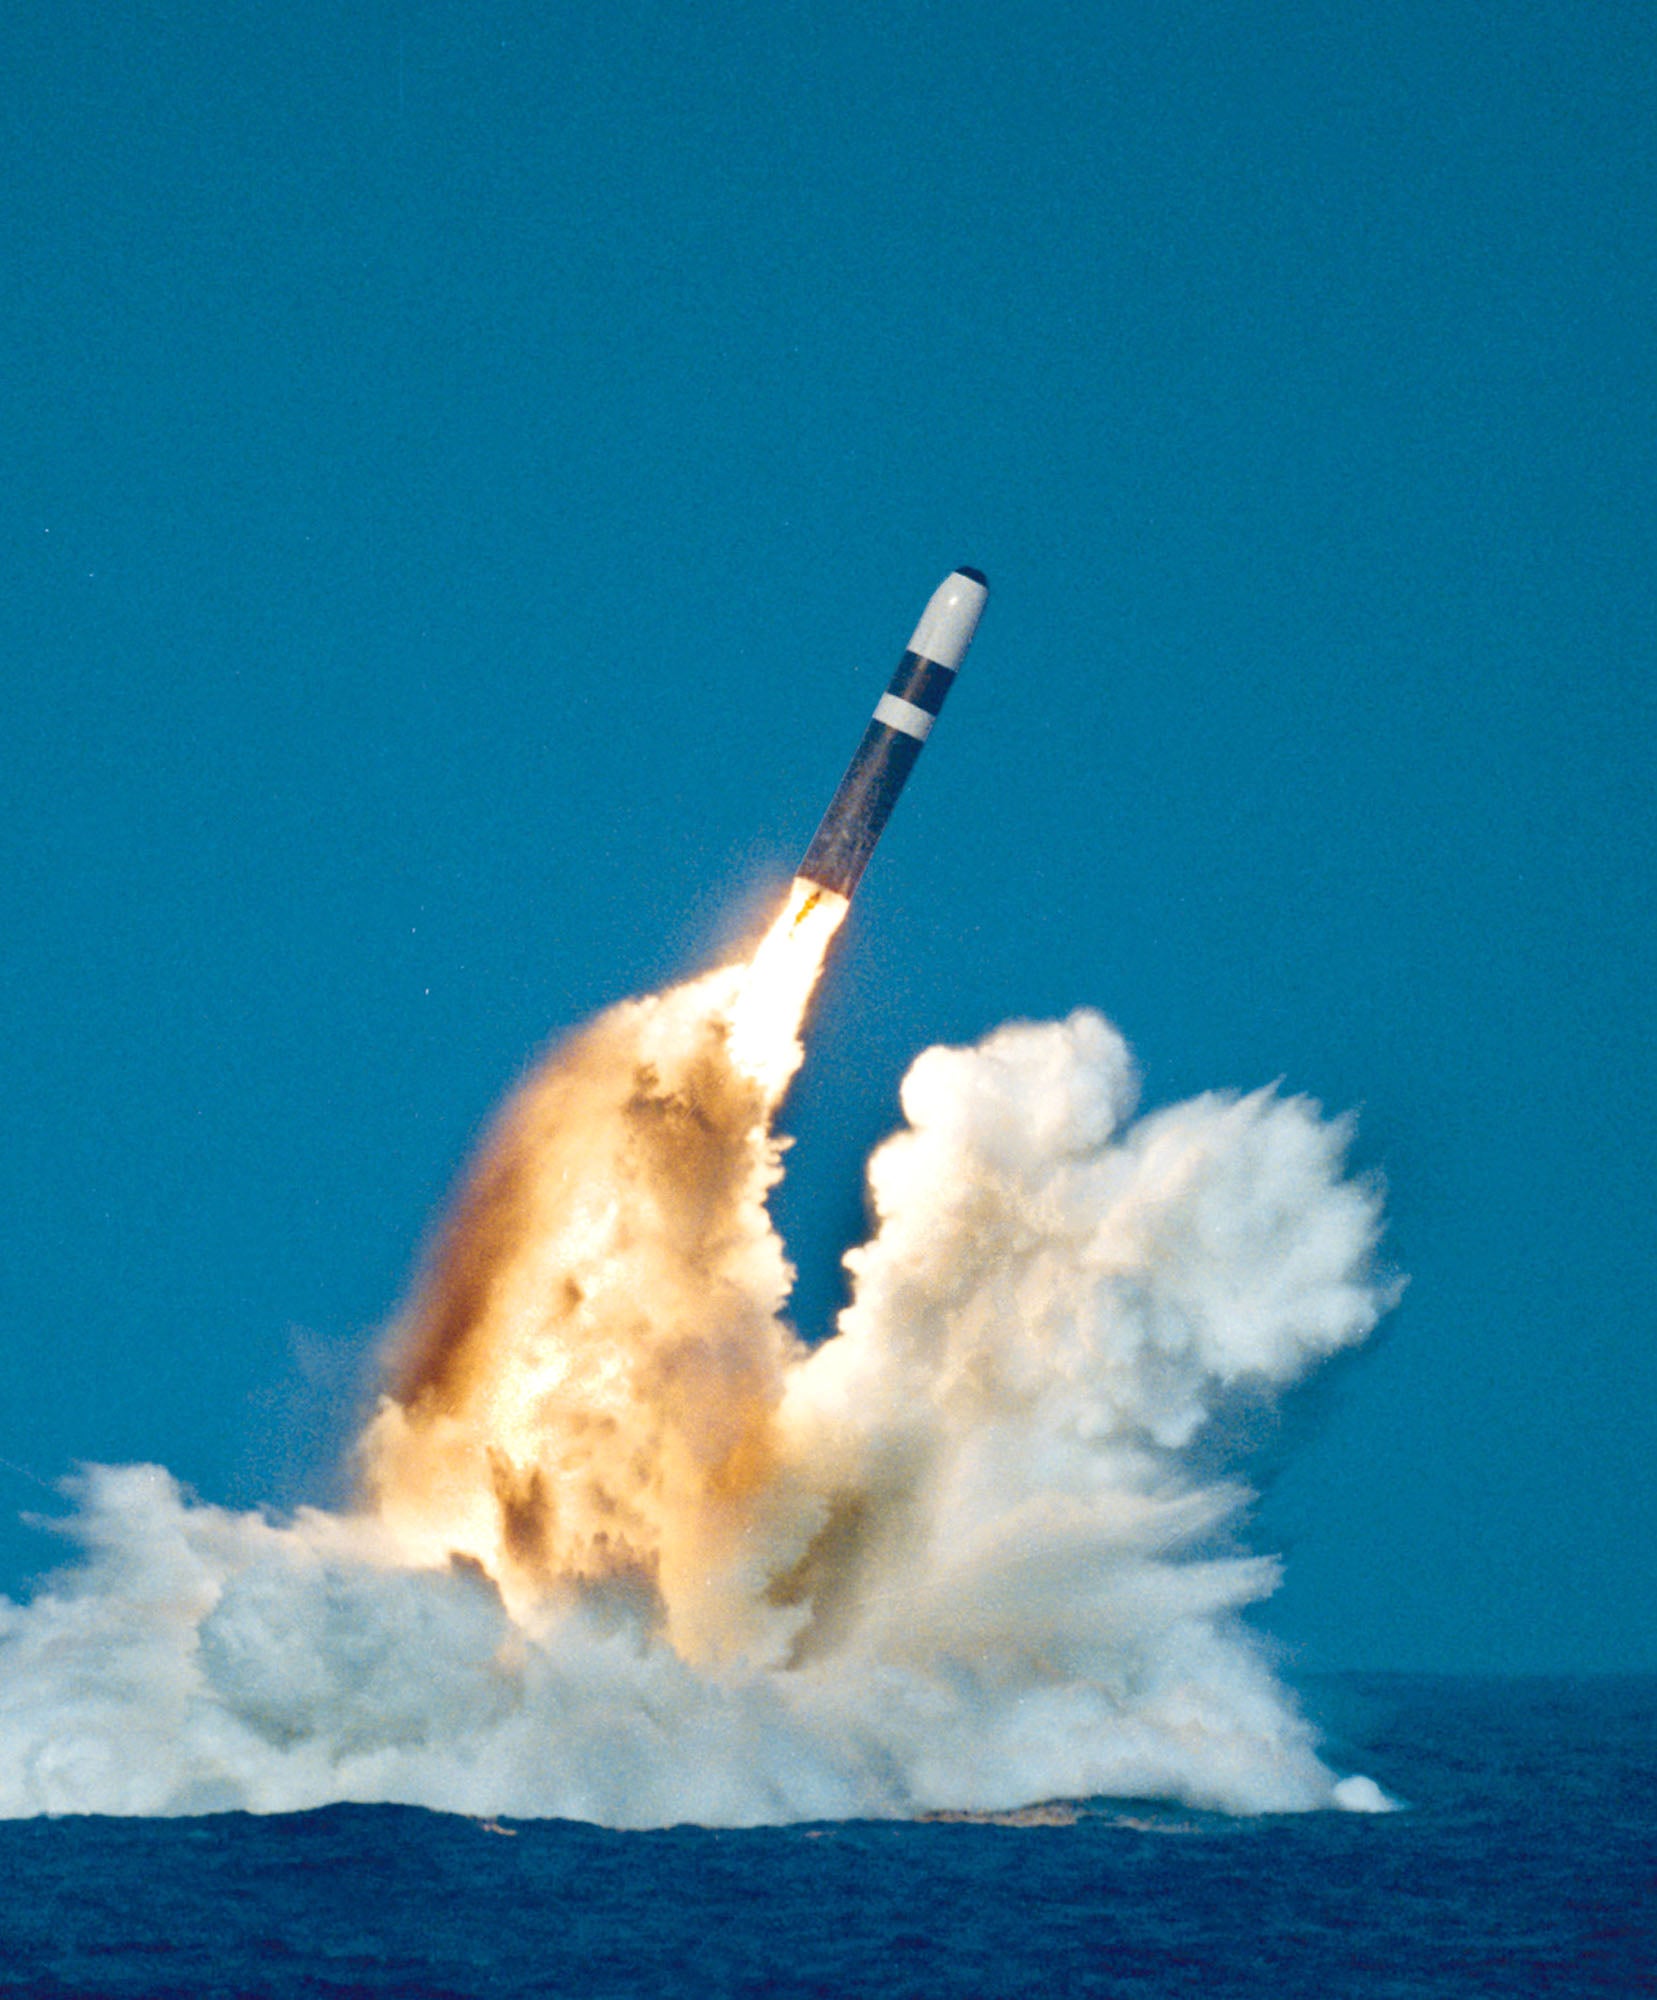 Undated File Photo: A Trident Ii, Or D-5 Missile, Is Launched From An Ohio-Class Submarine In This Undated File Photo. According To A Congressional Report To Be Released May 25, 1999, China Stole U.S. Nuclear Weapons Design Secrets Over 20 Years Through Espionage At Government Laboratories And Will Use The Information To Upgrade Its Own Arsenal. Among The Information Reported To Have Been Stolen, Was Details Of The W-88 Nuclear Warhead, Which Is Carried On The Trident Submarine And Described In The Report As "The Most Sophisticated Nuclear Weapon The United States Has Ever Built."  (Photo By Getty Images)